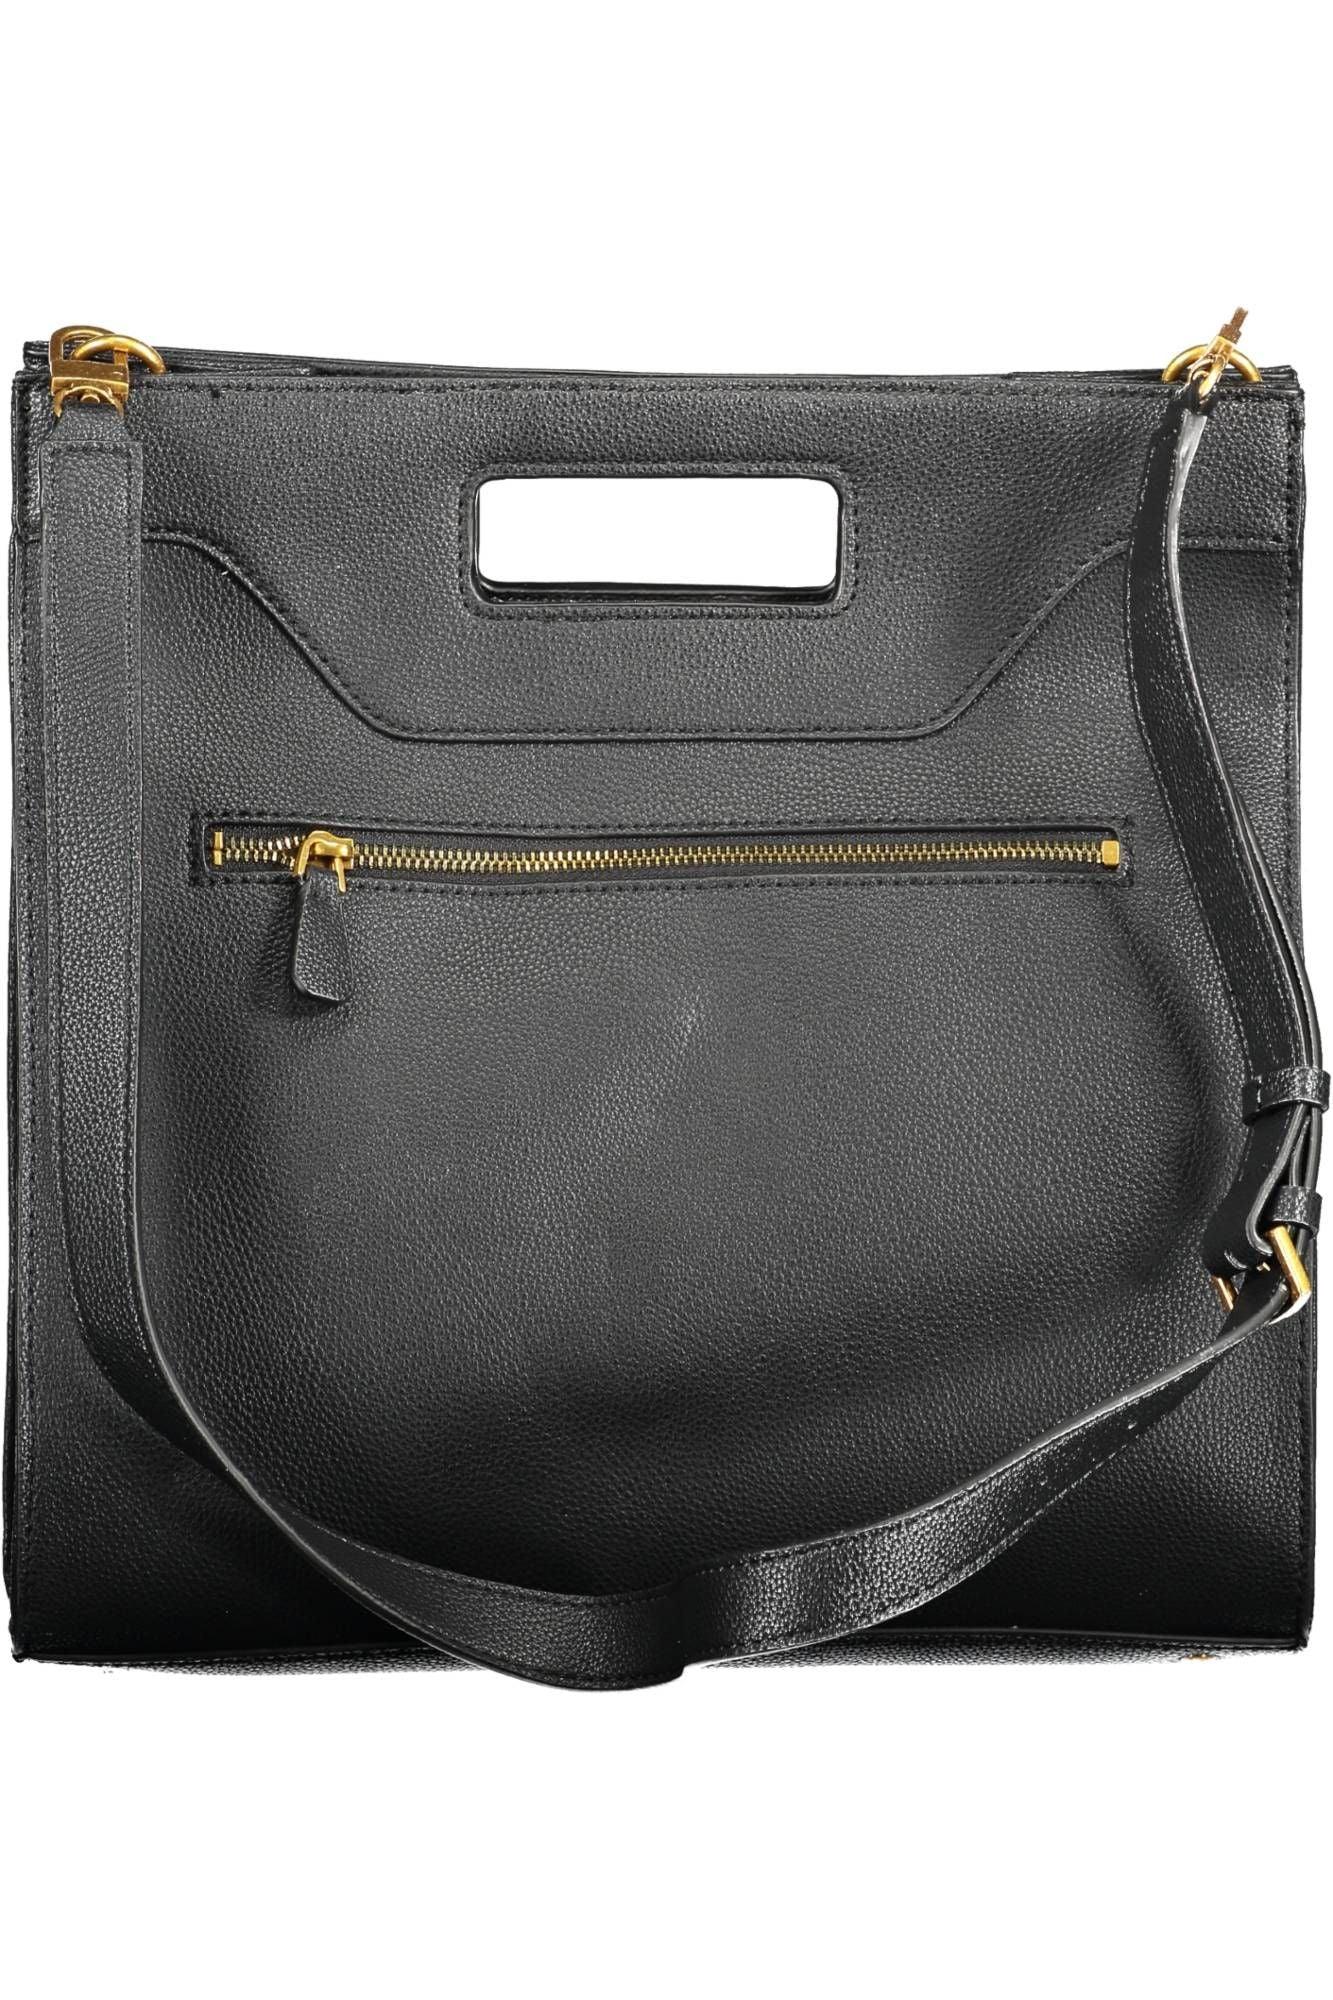 Guess Jeans Chic Black Handbag with Contrasting Details - PER.FASHION